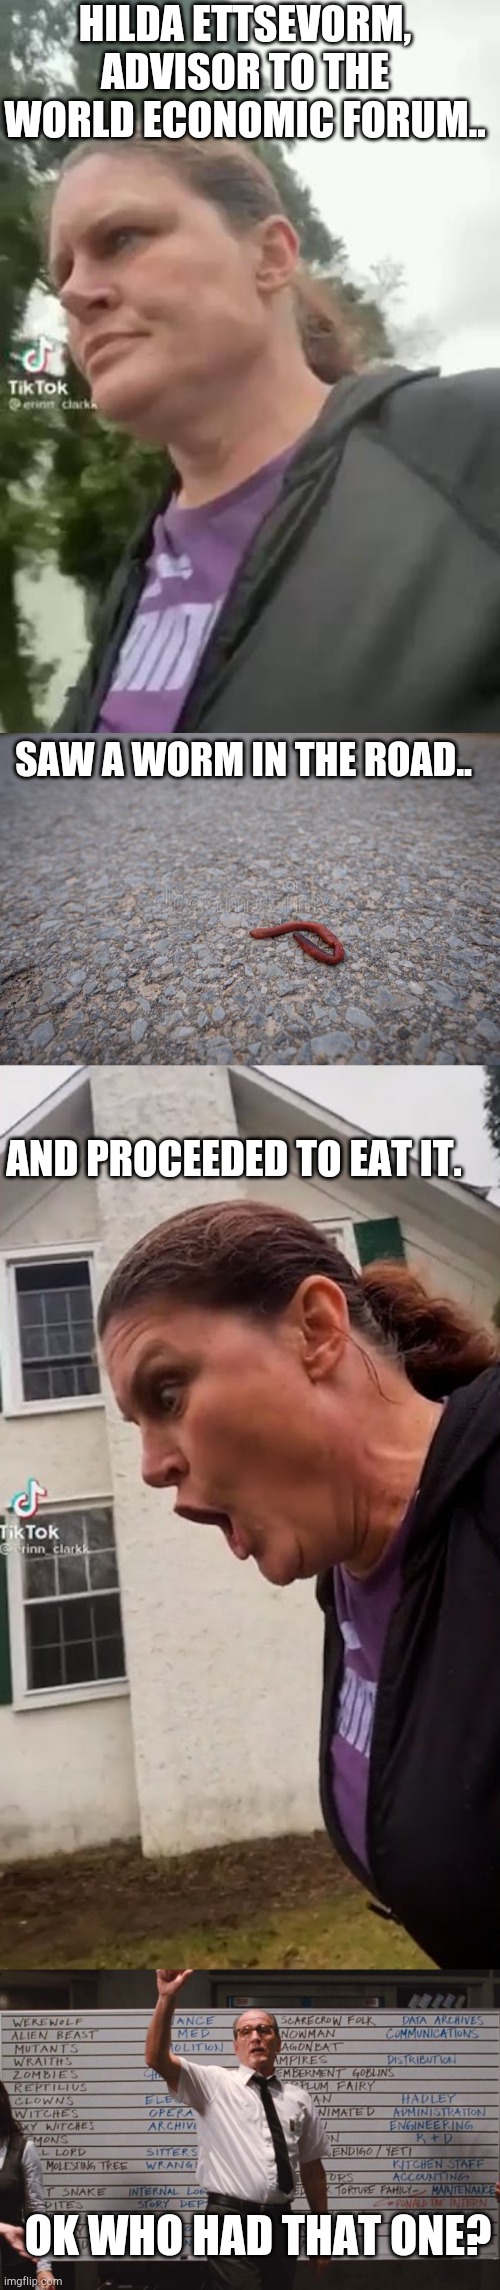 Hilda 'ettsevorm' - i see what they did there | HILDA ETTSEVORM, ADVISOR TO THE WORLD ECONOMIC FORUM.. SAW A WORM IN THE ROAD.. AND PROCEEDED TO EAT IT. OK WHO HAD THAT ONE? | image tagged in cabin the the woods,wef | made w/ Imgflip meme maker